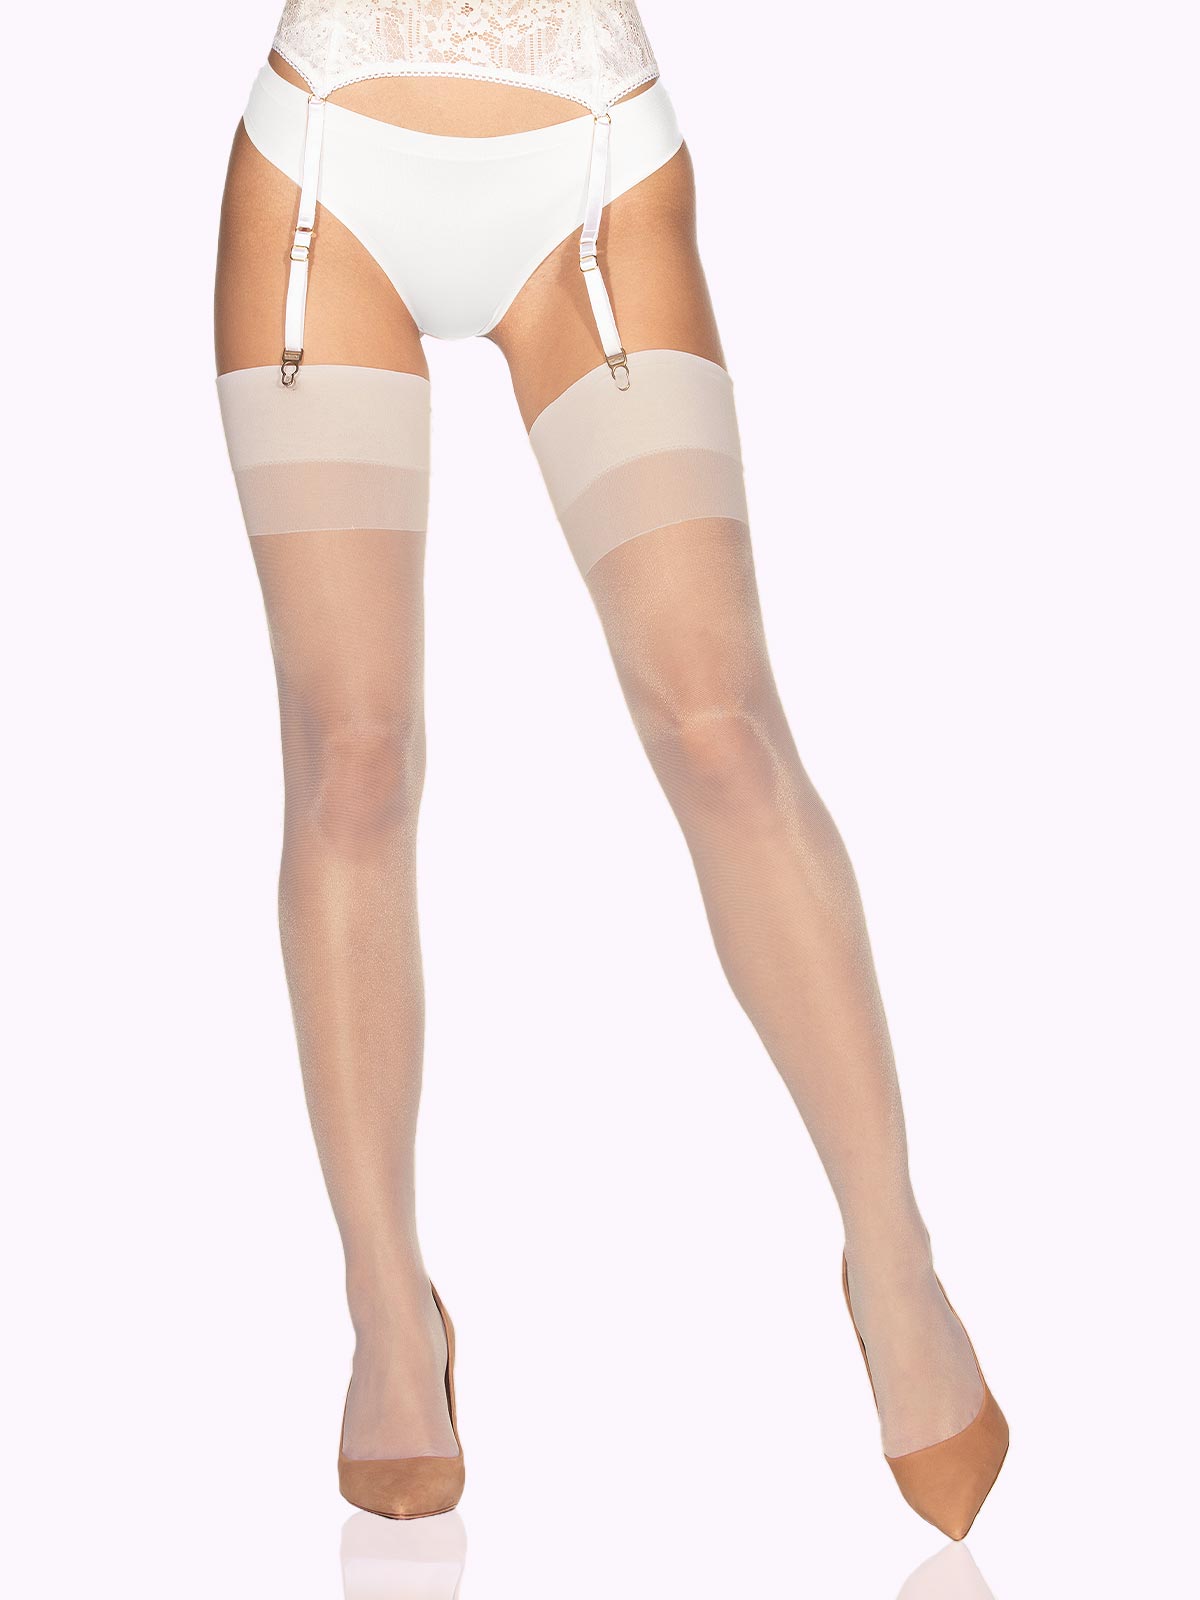 bargan recommends white thigh high stockings with garter belt pic